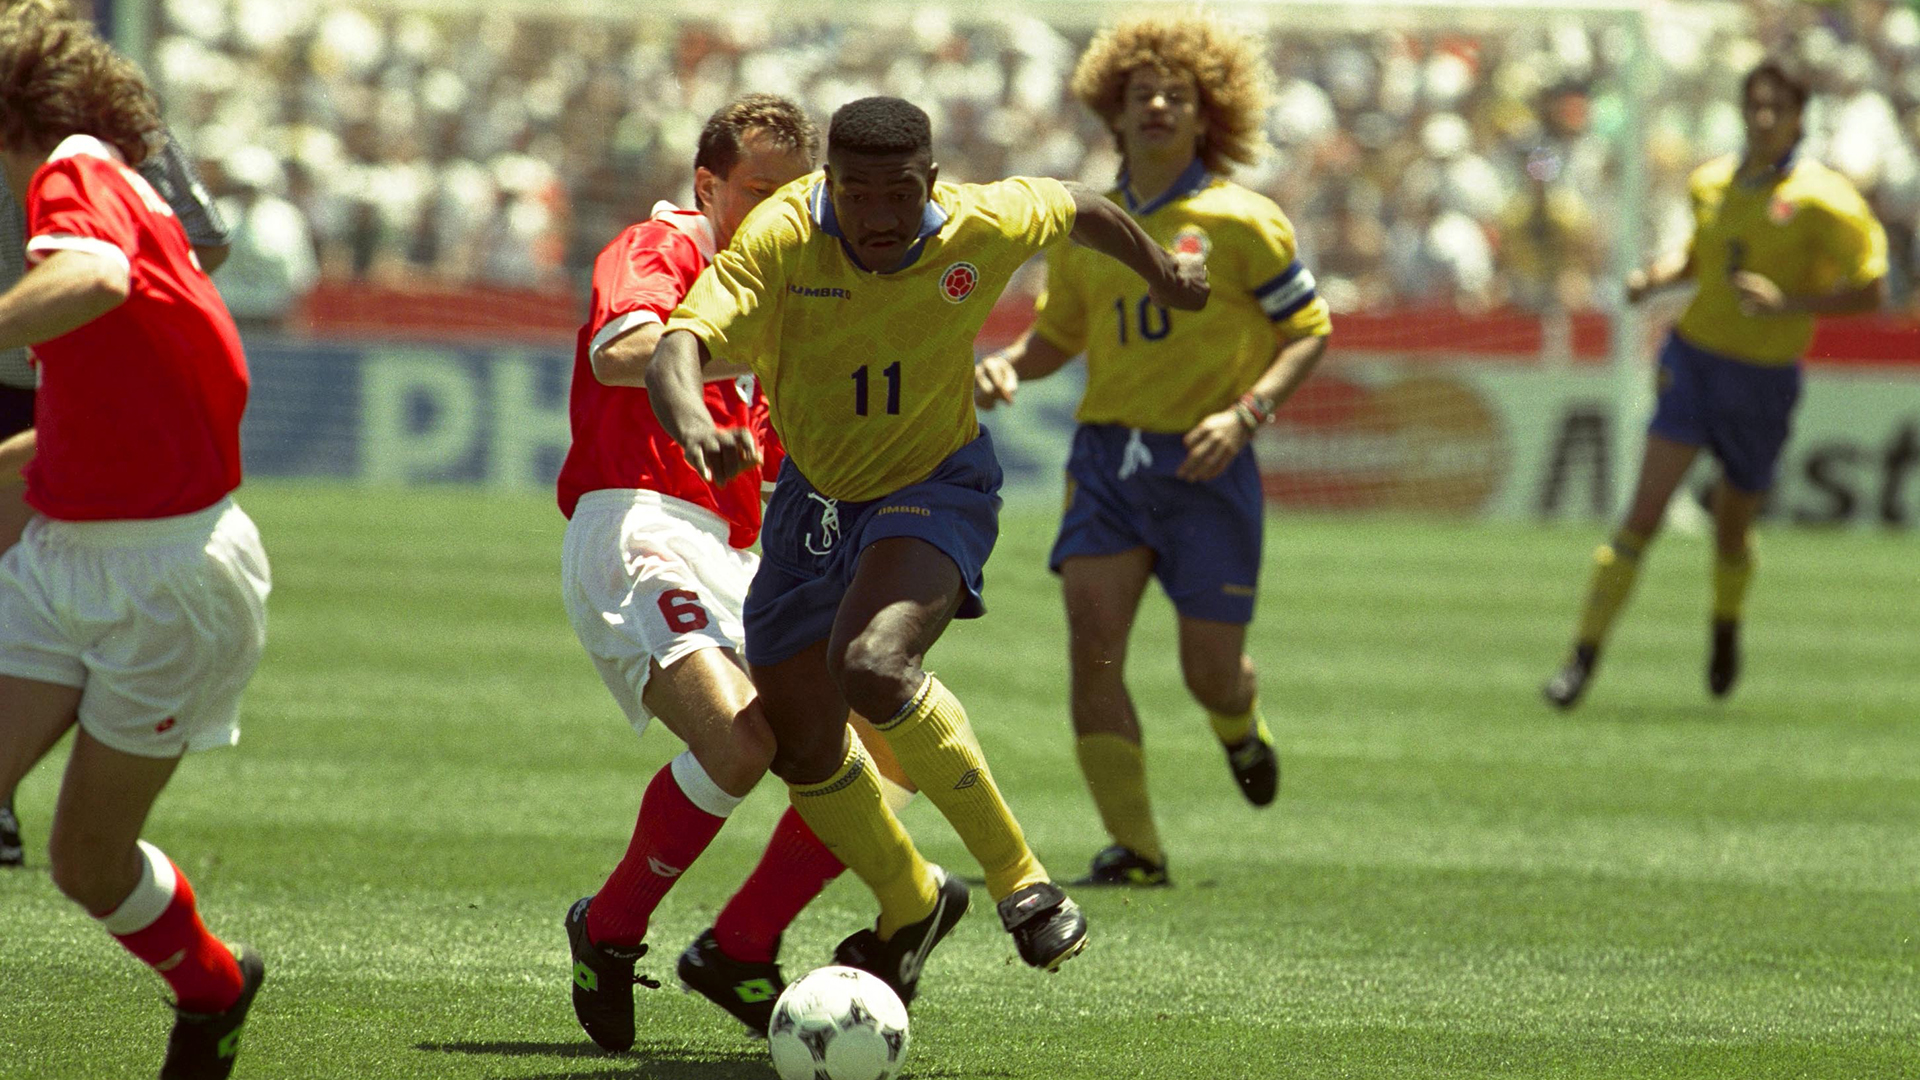 Football - 1994 FIFA World Cup - Group A - Switzerland v Colombia - Stanford Stadium, San Francisco - 26/6/94 Adolfo Valencia - Colombia in action against Georges Bregy - Switzerland Mandatory Credit:ActionImages / Action Images